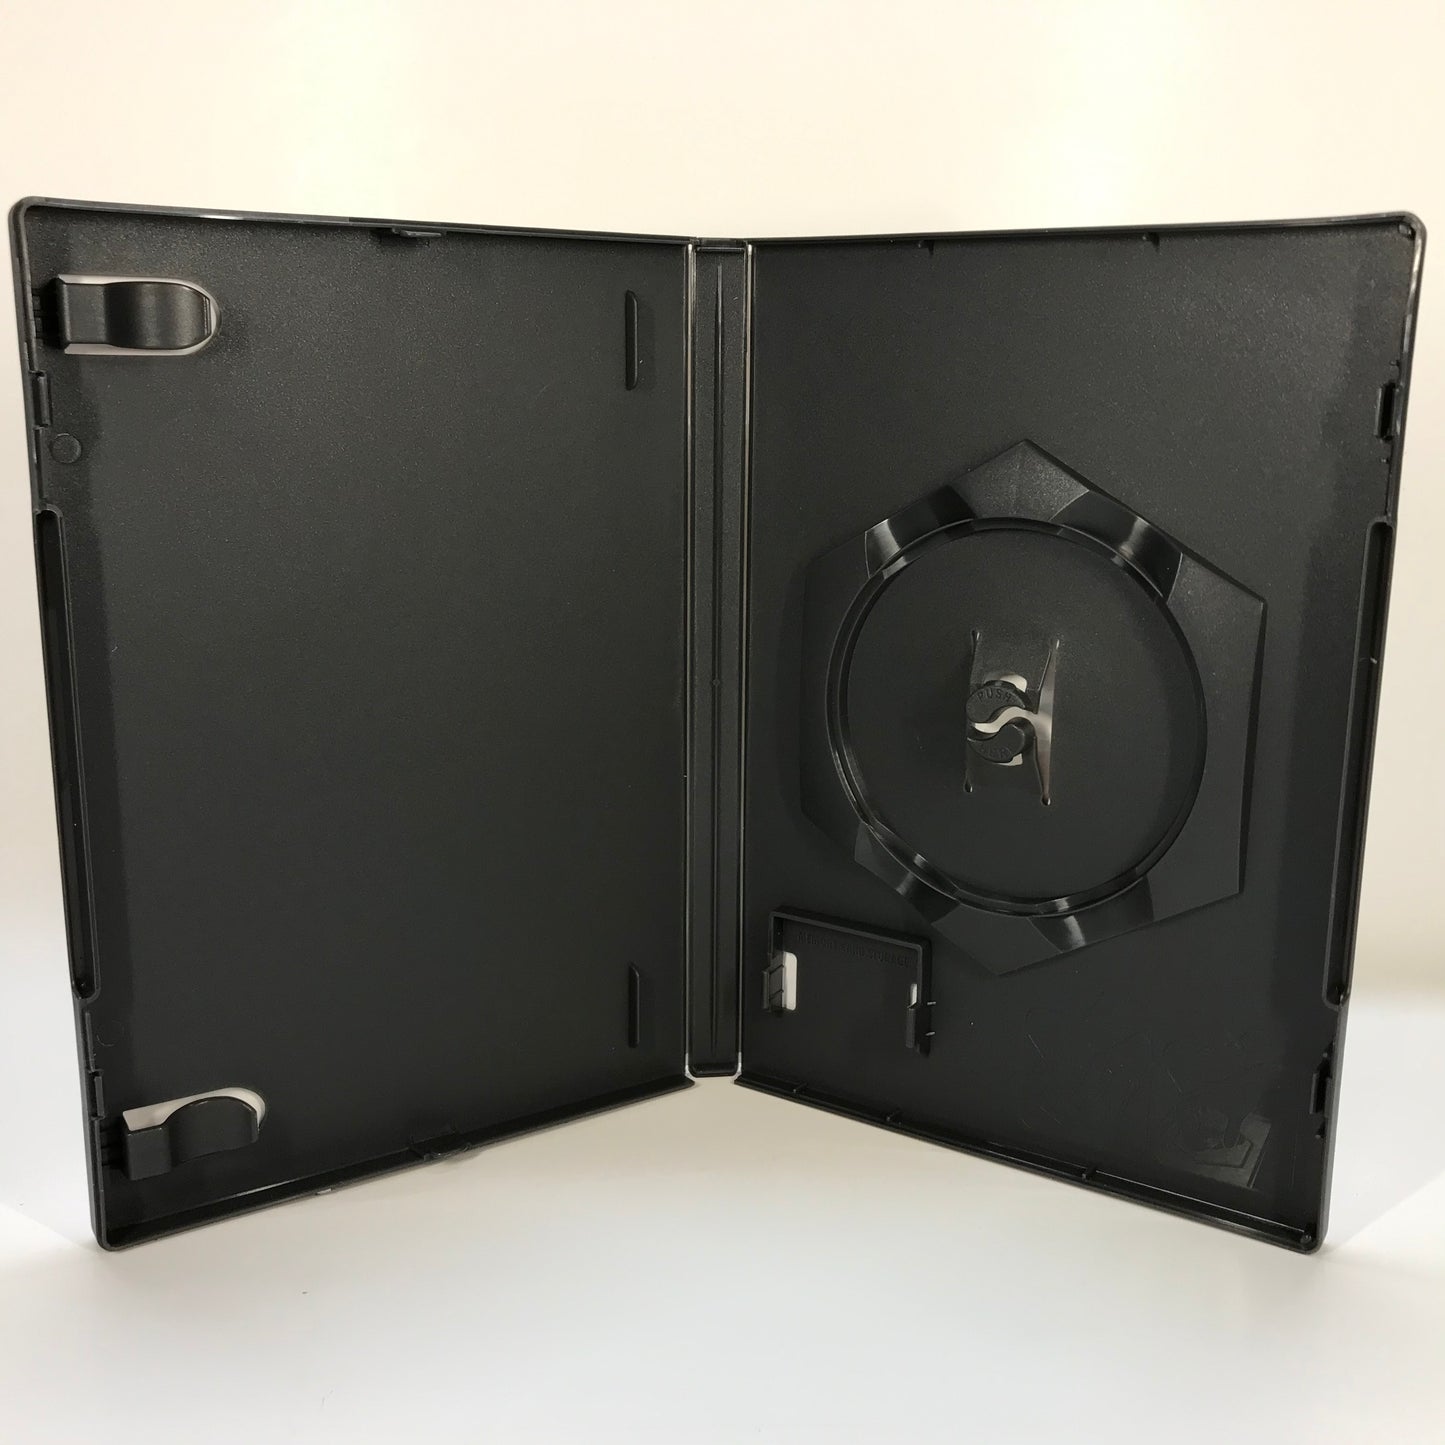 GameCube Replacement Case - NO GAME - Extreme G3